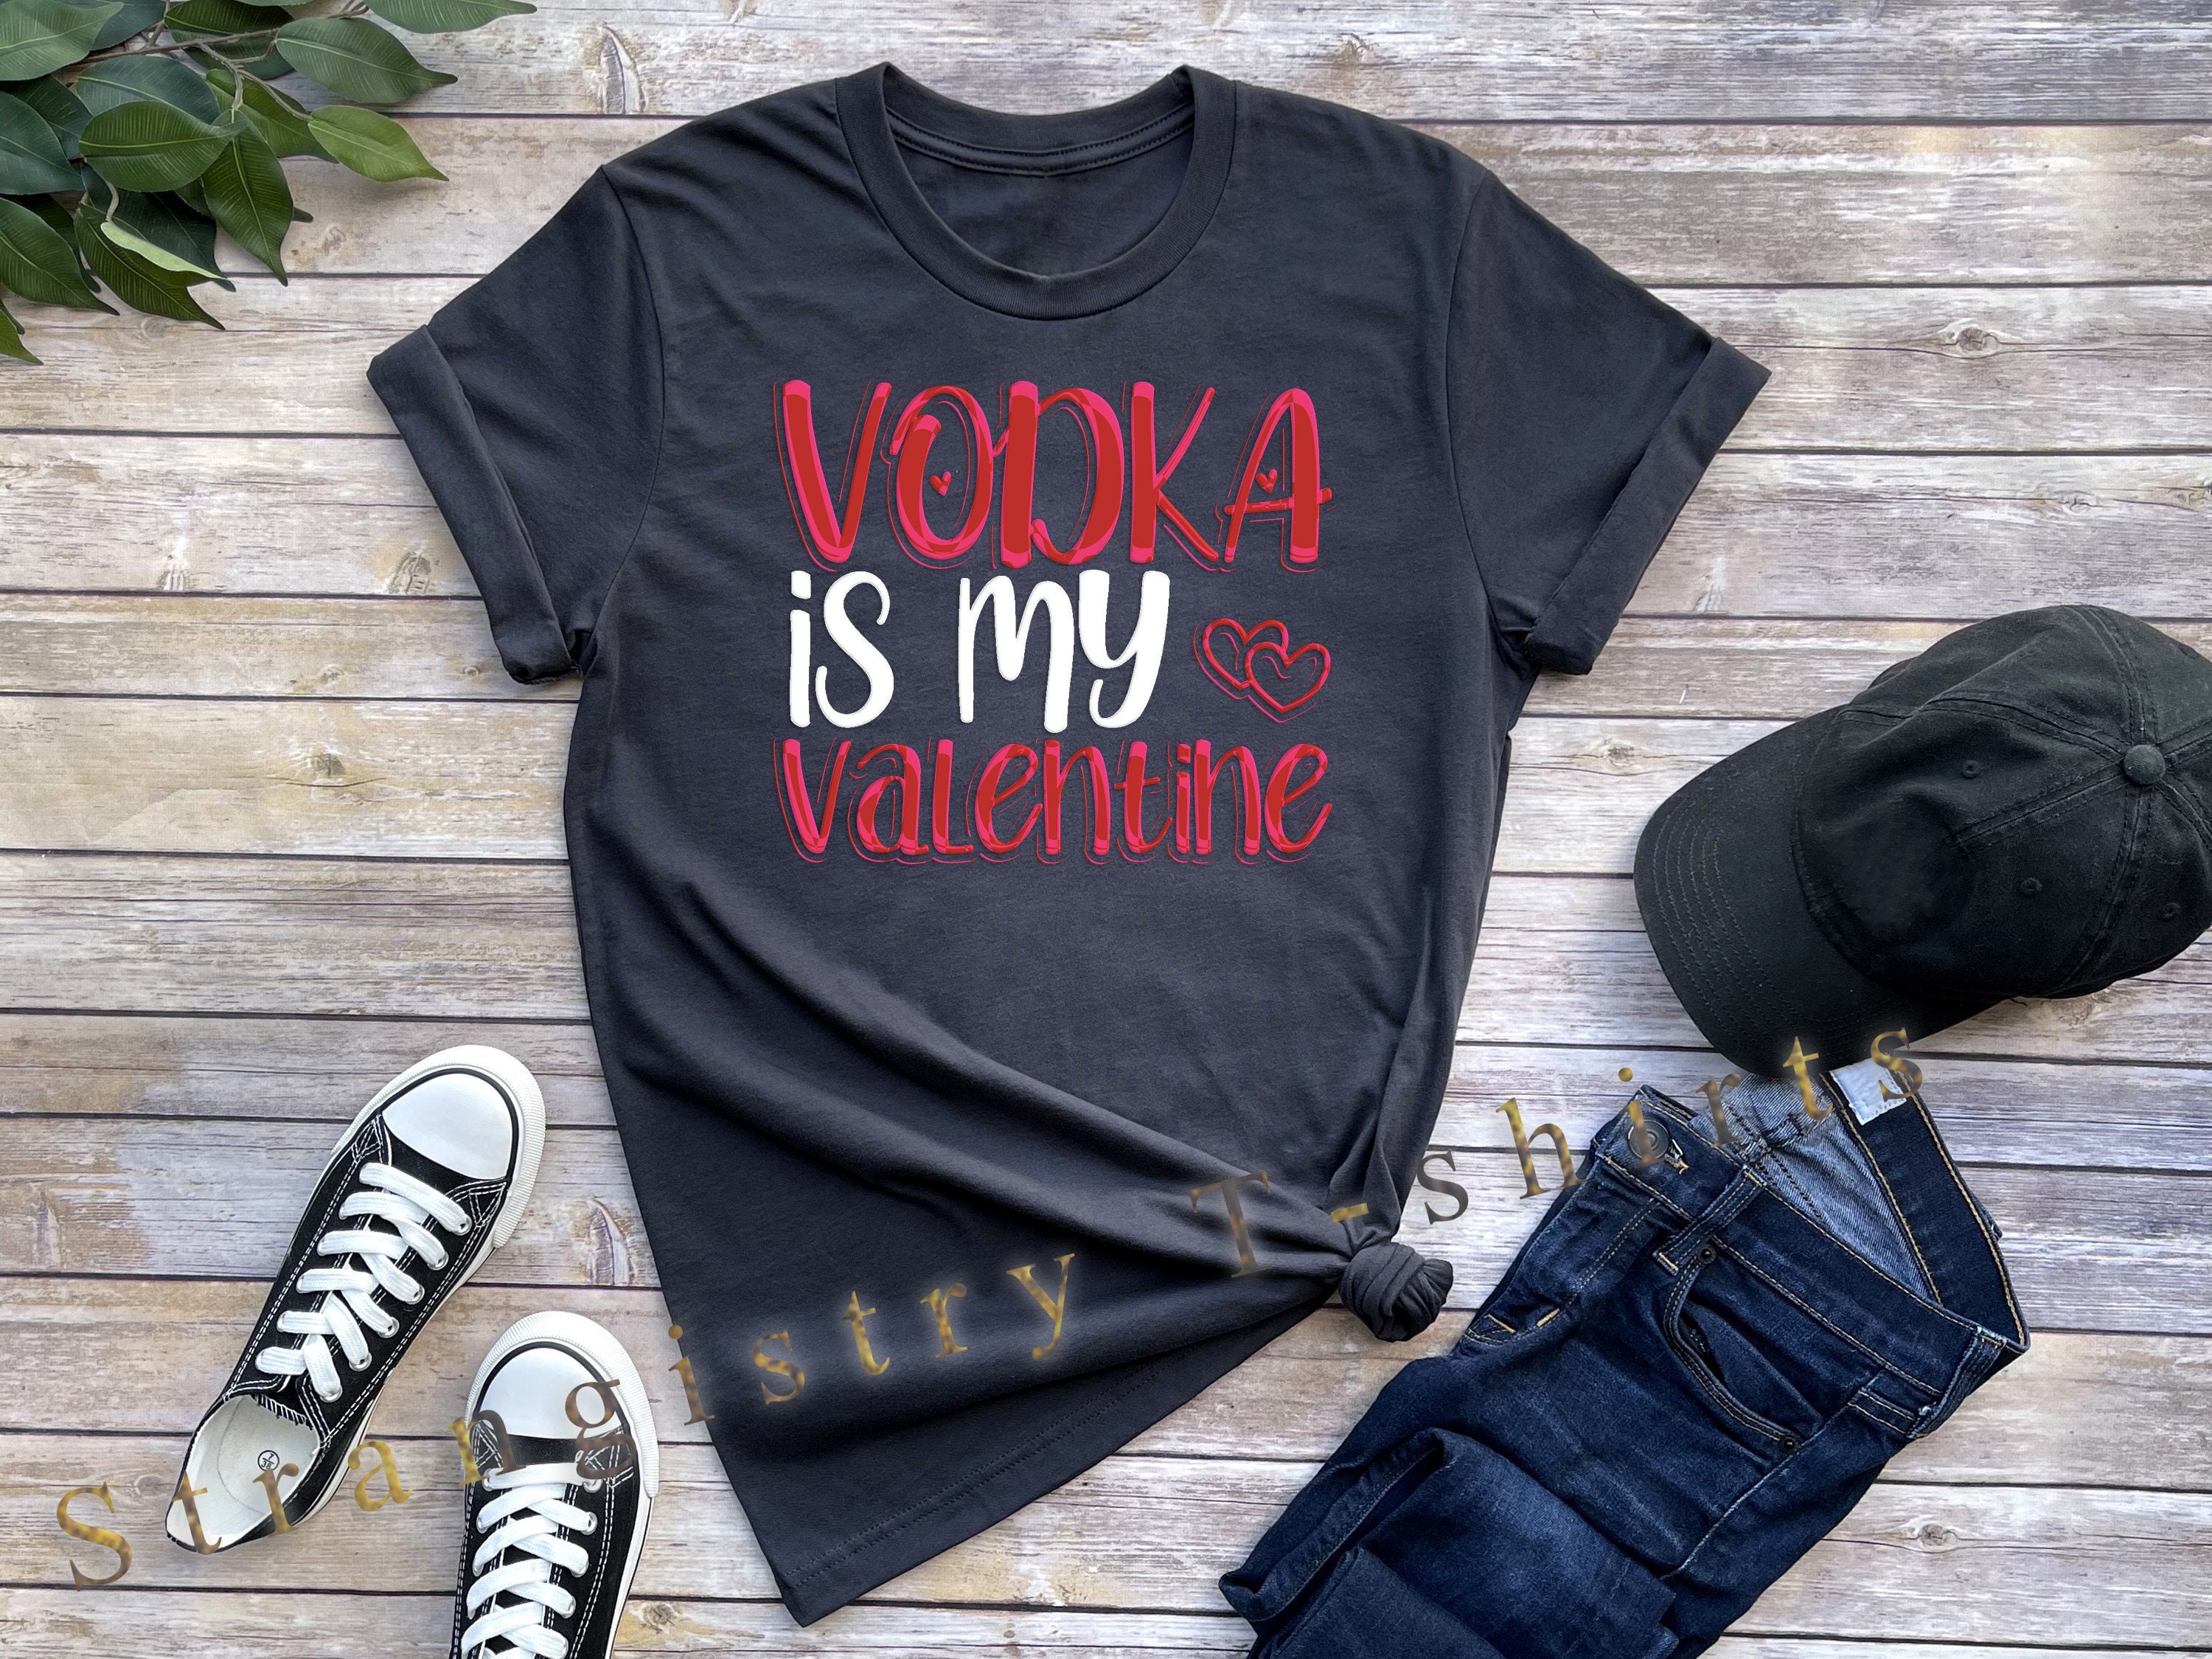 Love T-shirt with Funny Text. Custom Design Shirt with the Funny Text of “Vodka Is My Valentine”. Sarcastic Love Tshirt for Men and Women